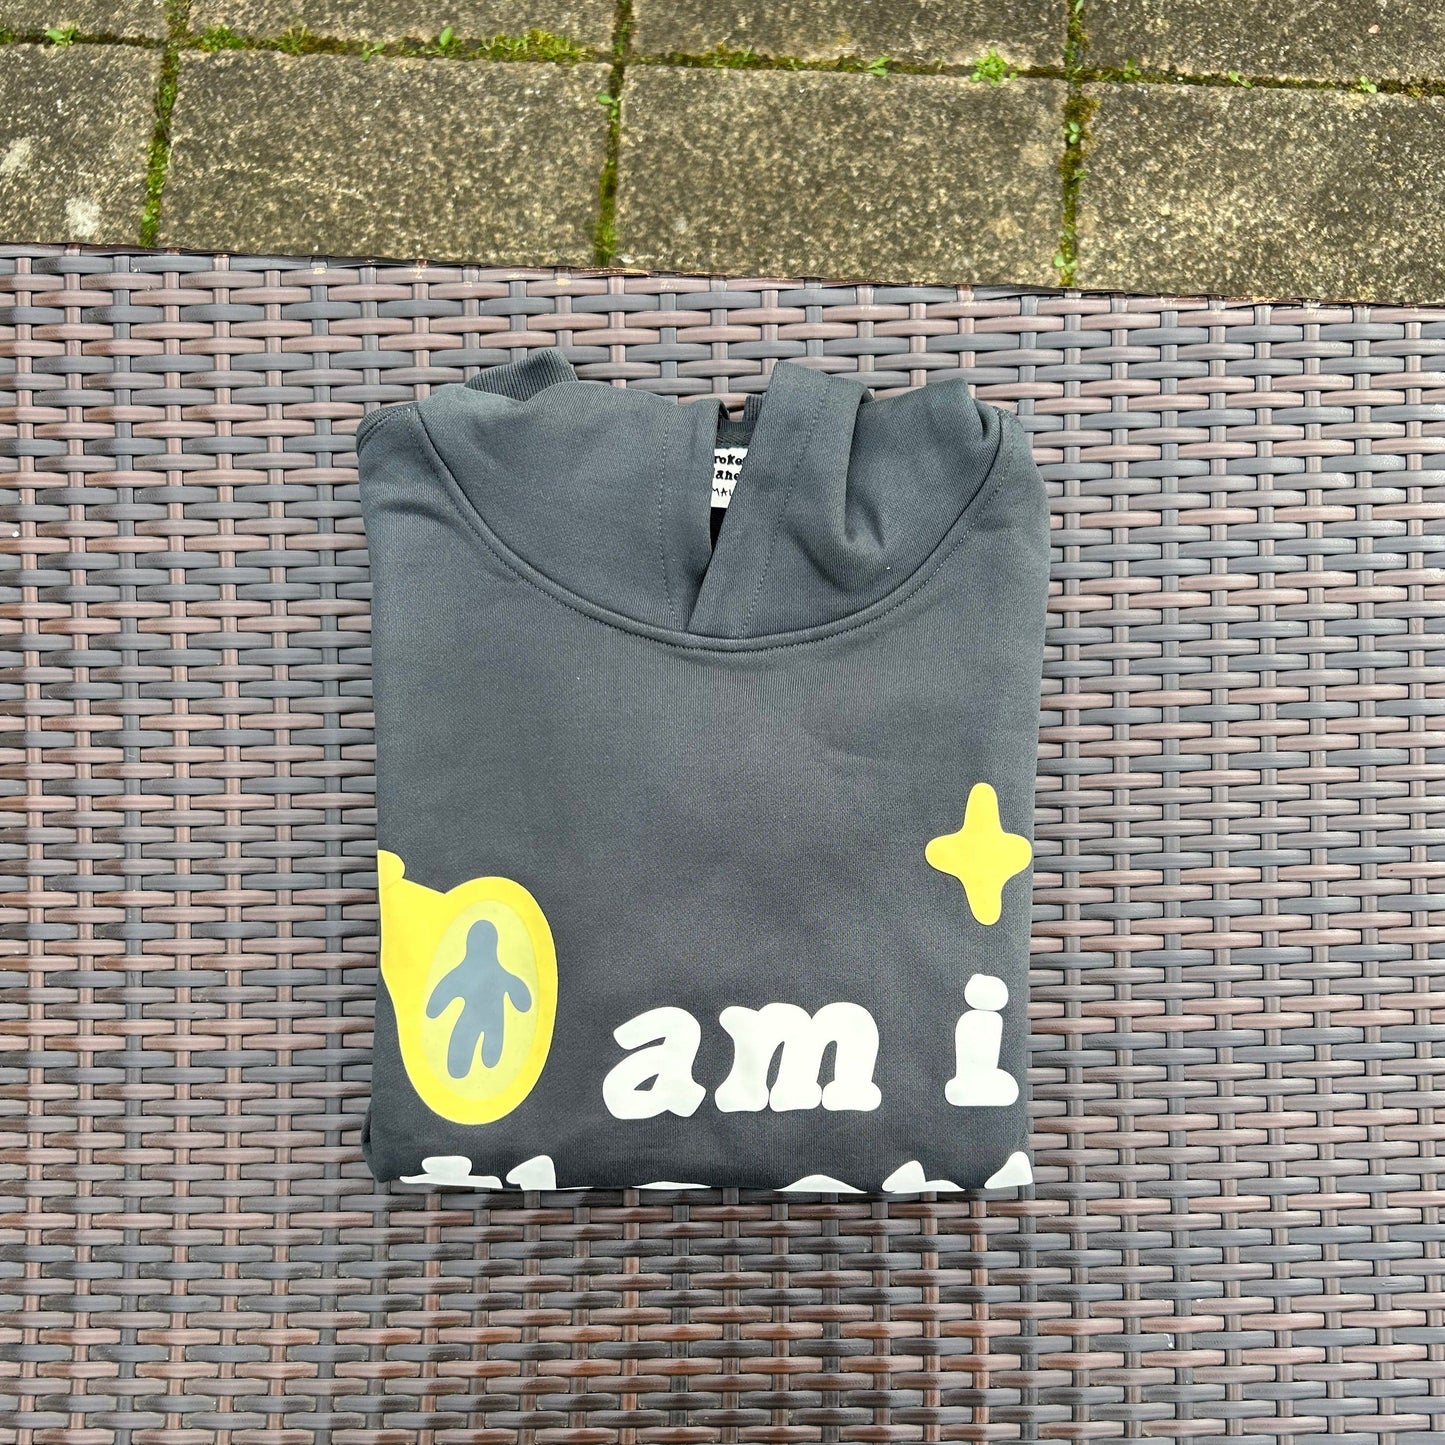 Broken Planet "Am I The Only One" Hoodie